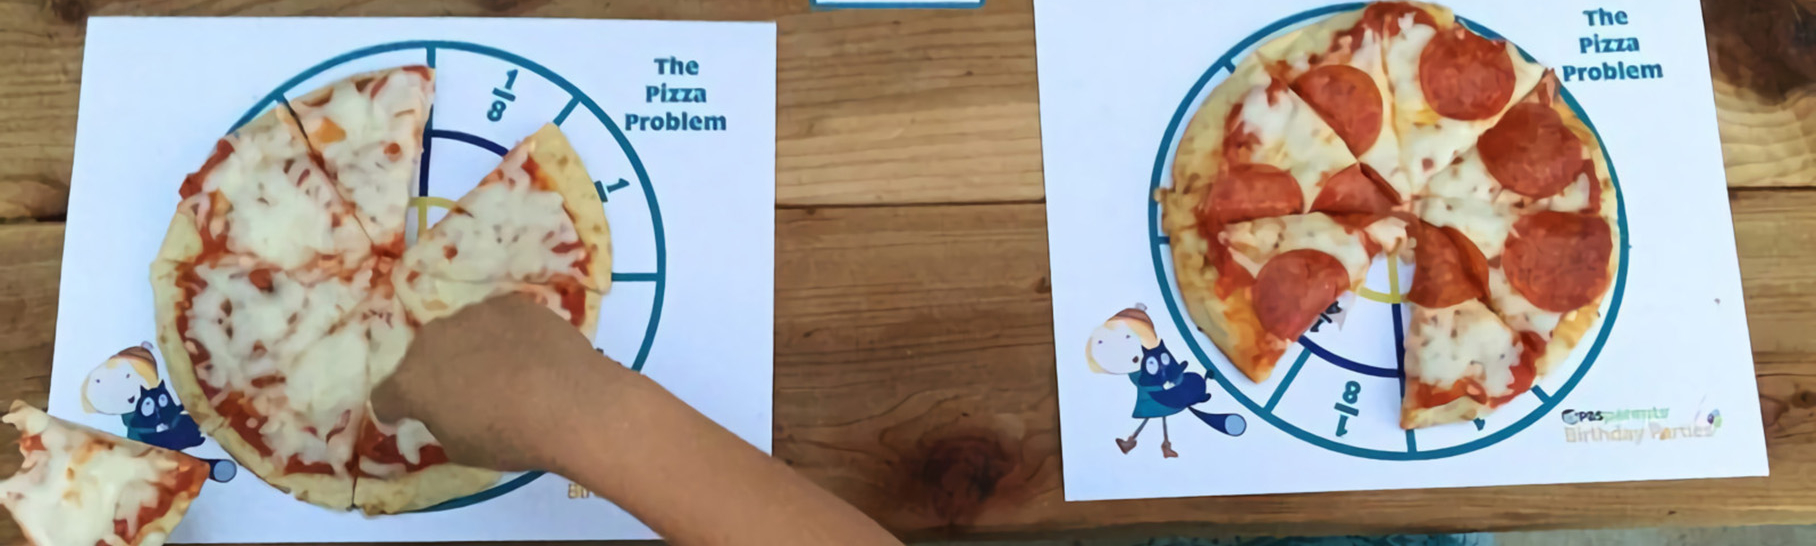 Two children sitting in front of their personal pizza on the pizza placemat with the one eighth fraction card above their personal pizza.